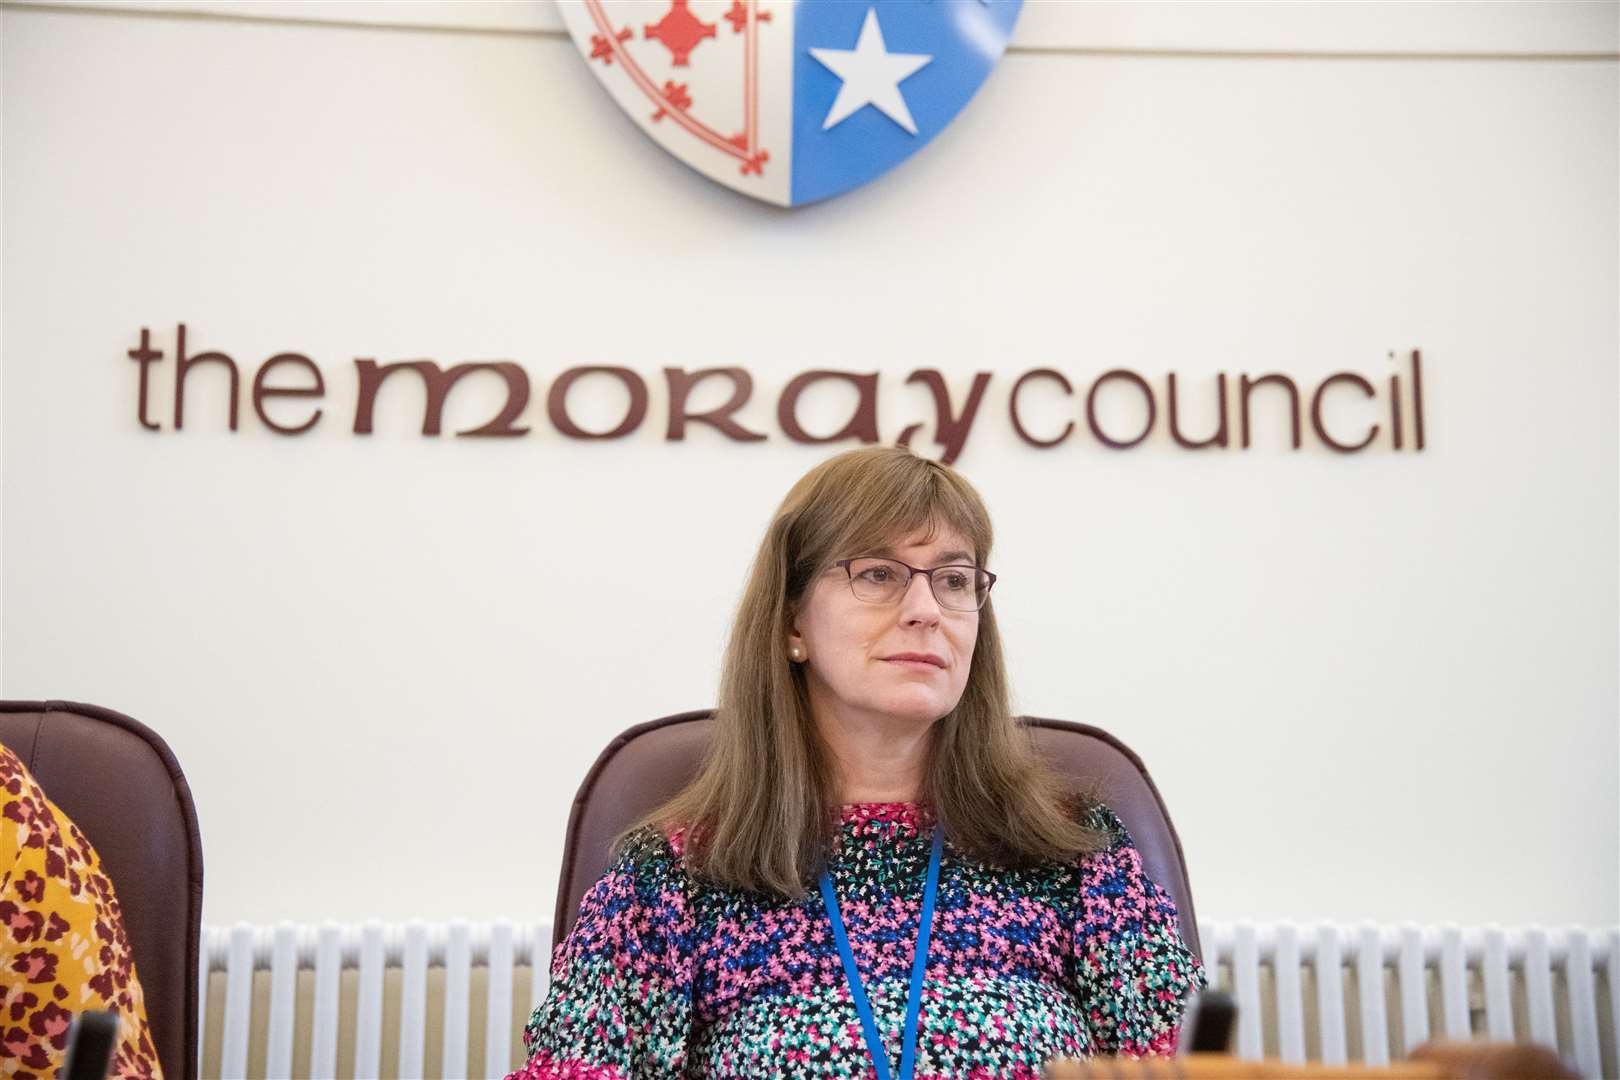 Moray Council leader and chair of the education, children’s and leisure services committee, Councillor Kathleen Robertson. Picture: Daniel Forsyth